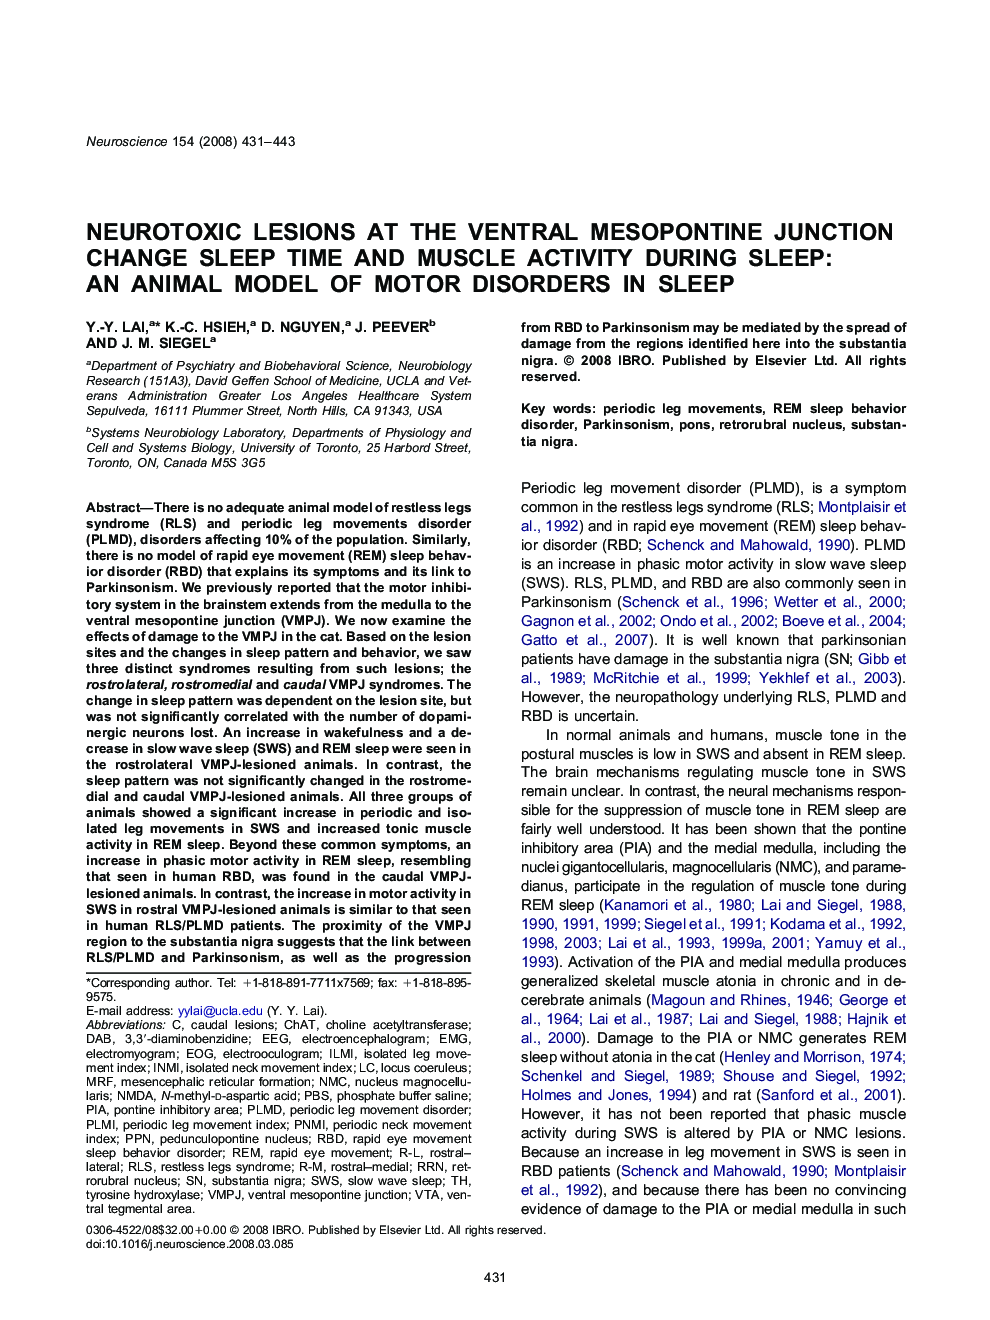 Neurotoxic lesions at the ventral mesopontine junction change sleep time and muscle activity during sleep: An animal model of motor disorders in sleep